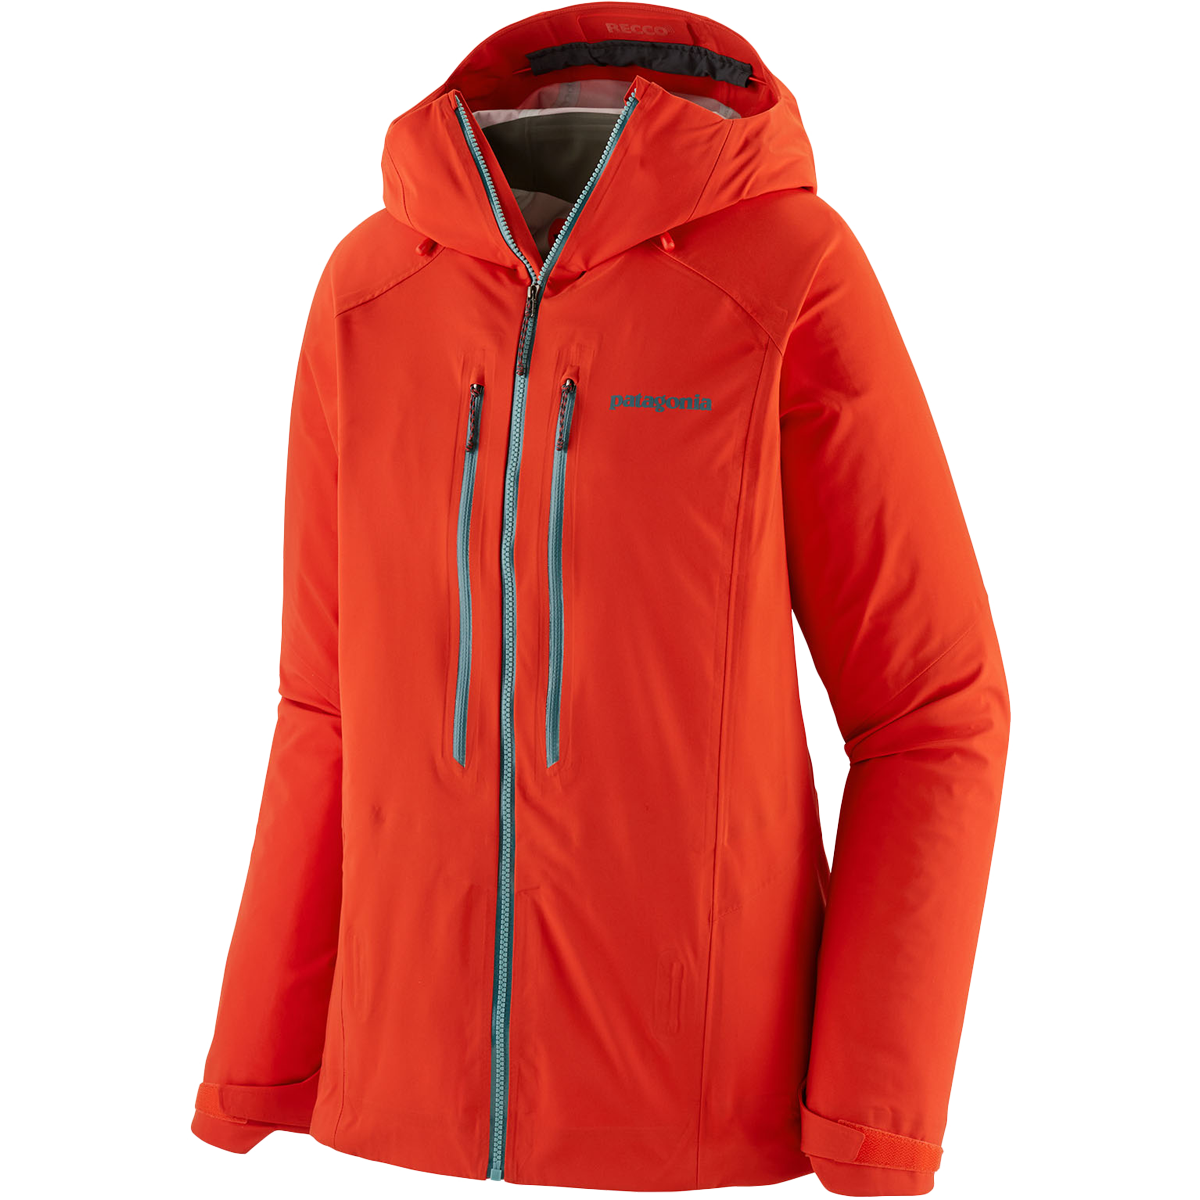 Patagonia Women's Poppy Fields Guide Jacket Size Large - Athletic apparel